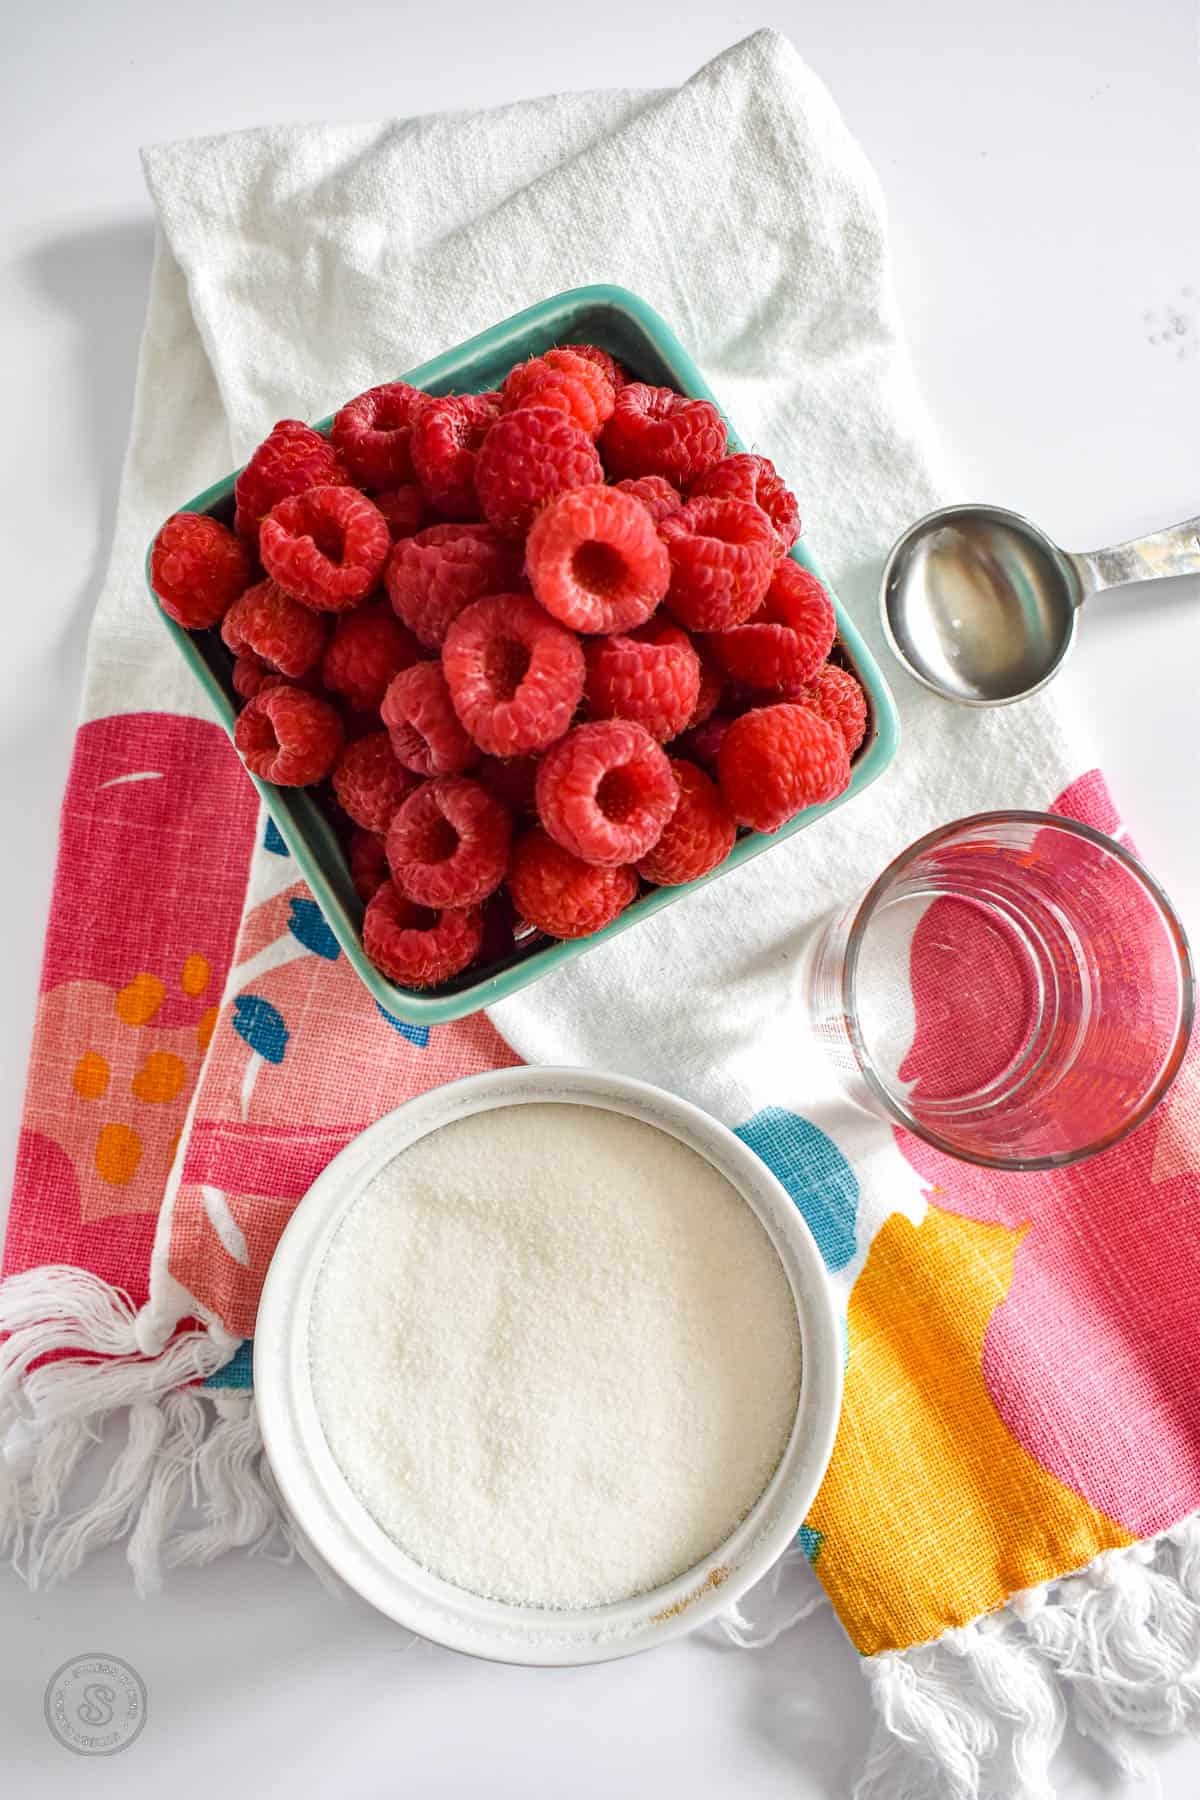 A teal container with bright red raspberries with a bowl of sugar and other utensils on a colorful dish towel